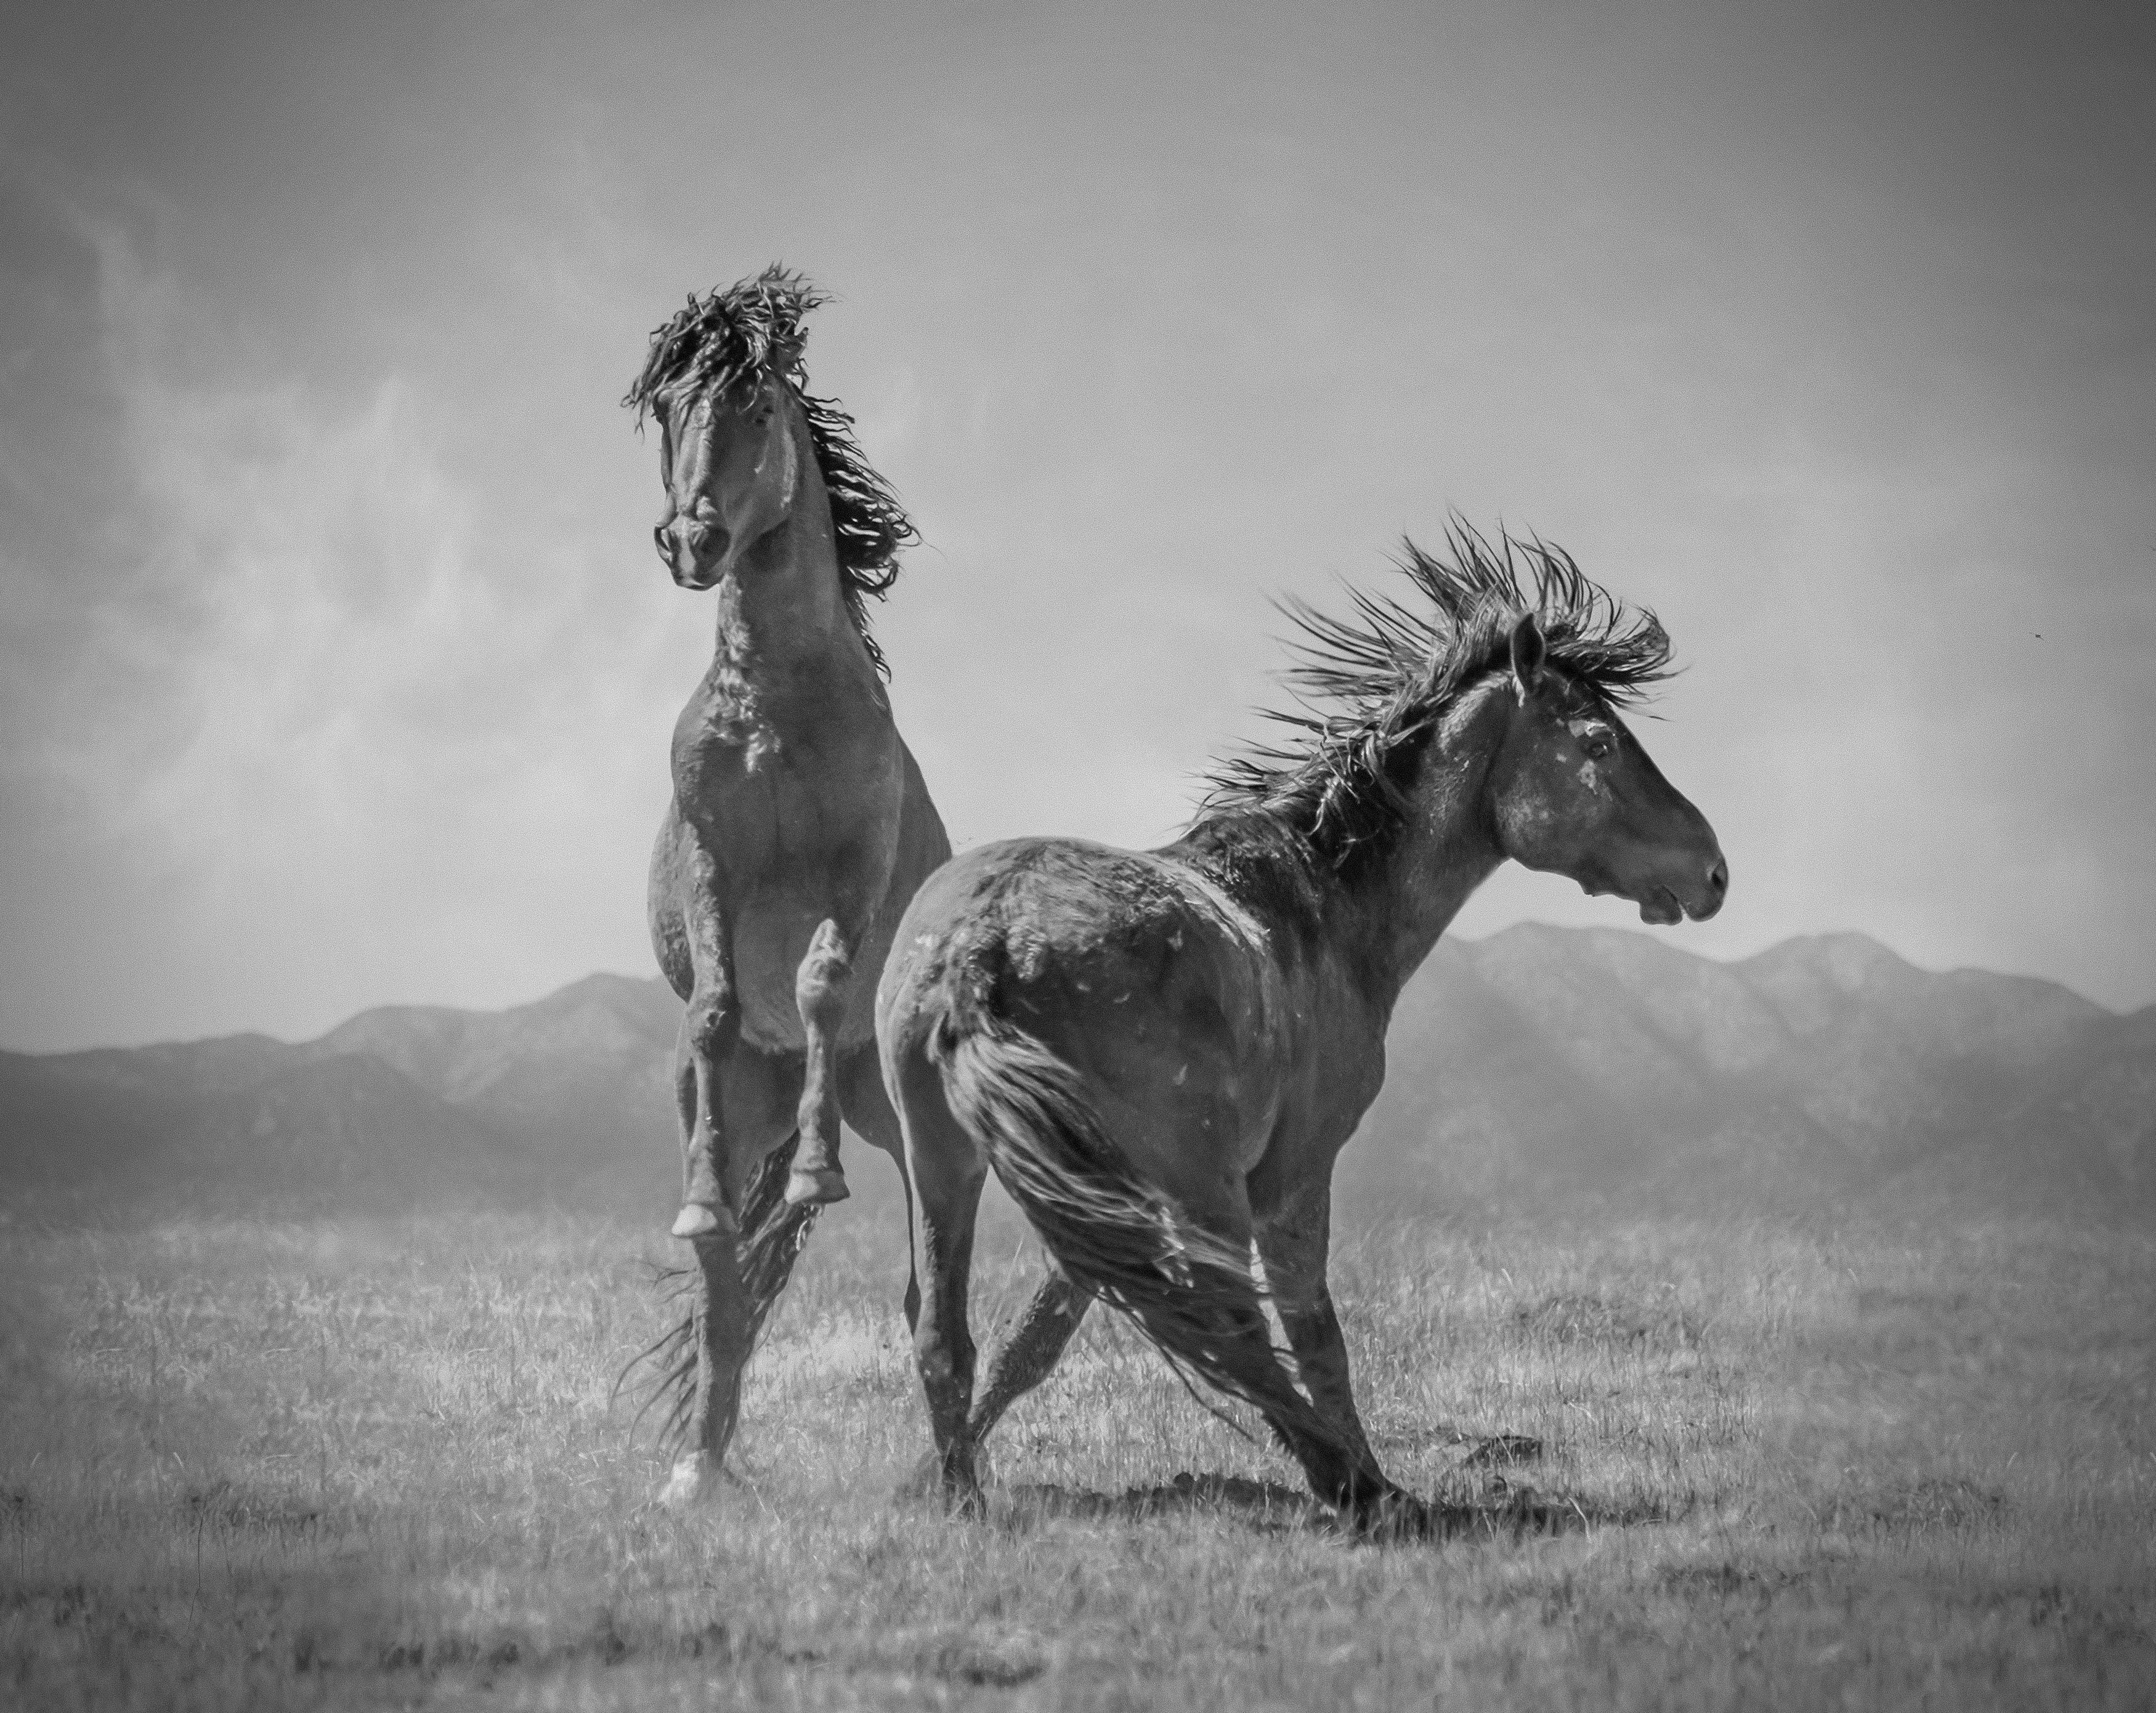 Shane Russeck Black and White Photograph - "Wonder Horses" 28x40 - Black & White Photography, Wild Horses Mustangs 